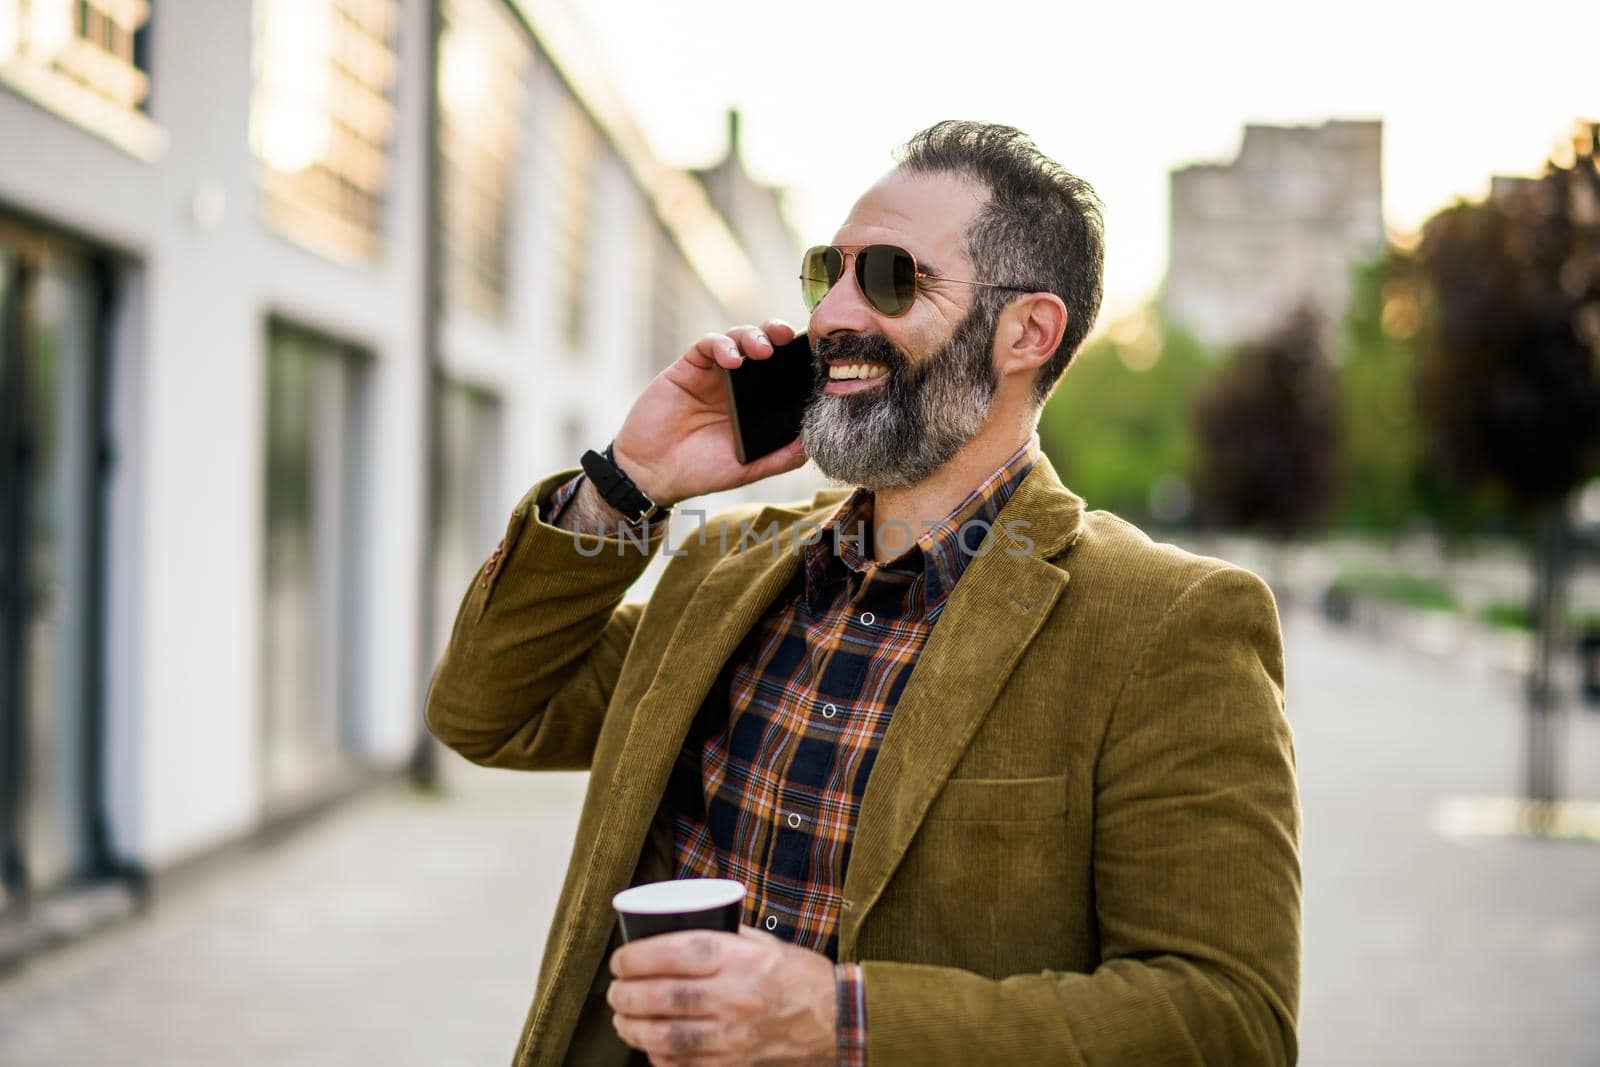 Portrait of modern businessman with beard using mobile phone and drinking coffee while standing on the city street.